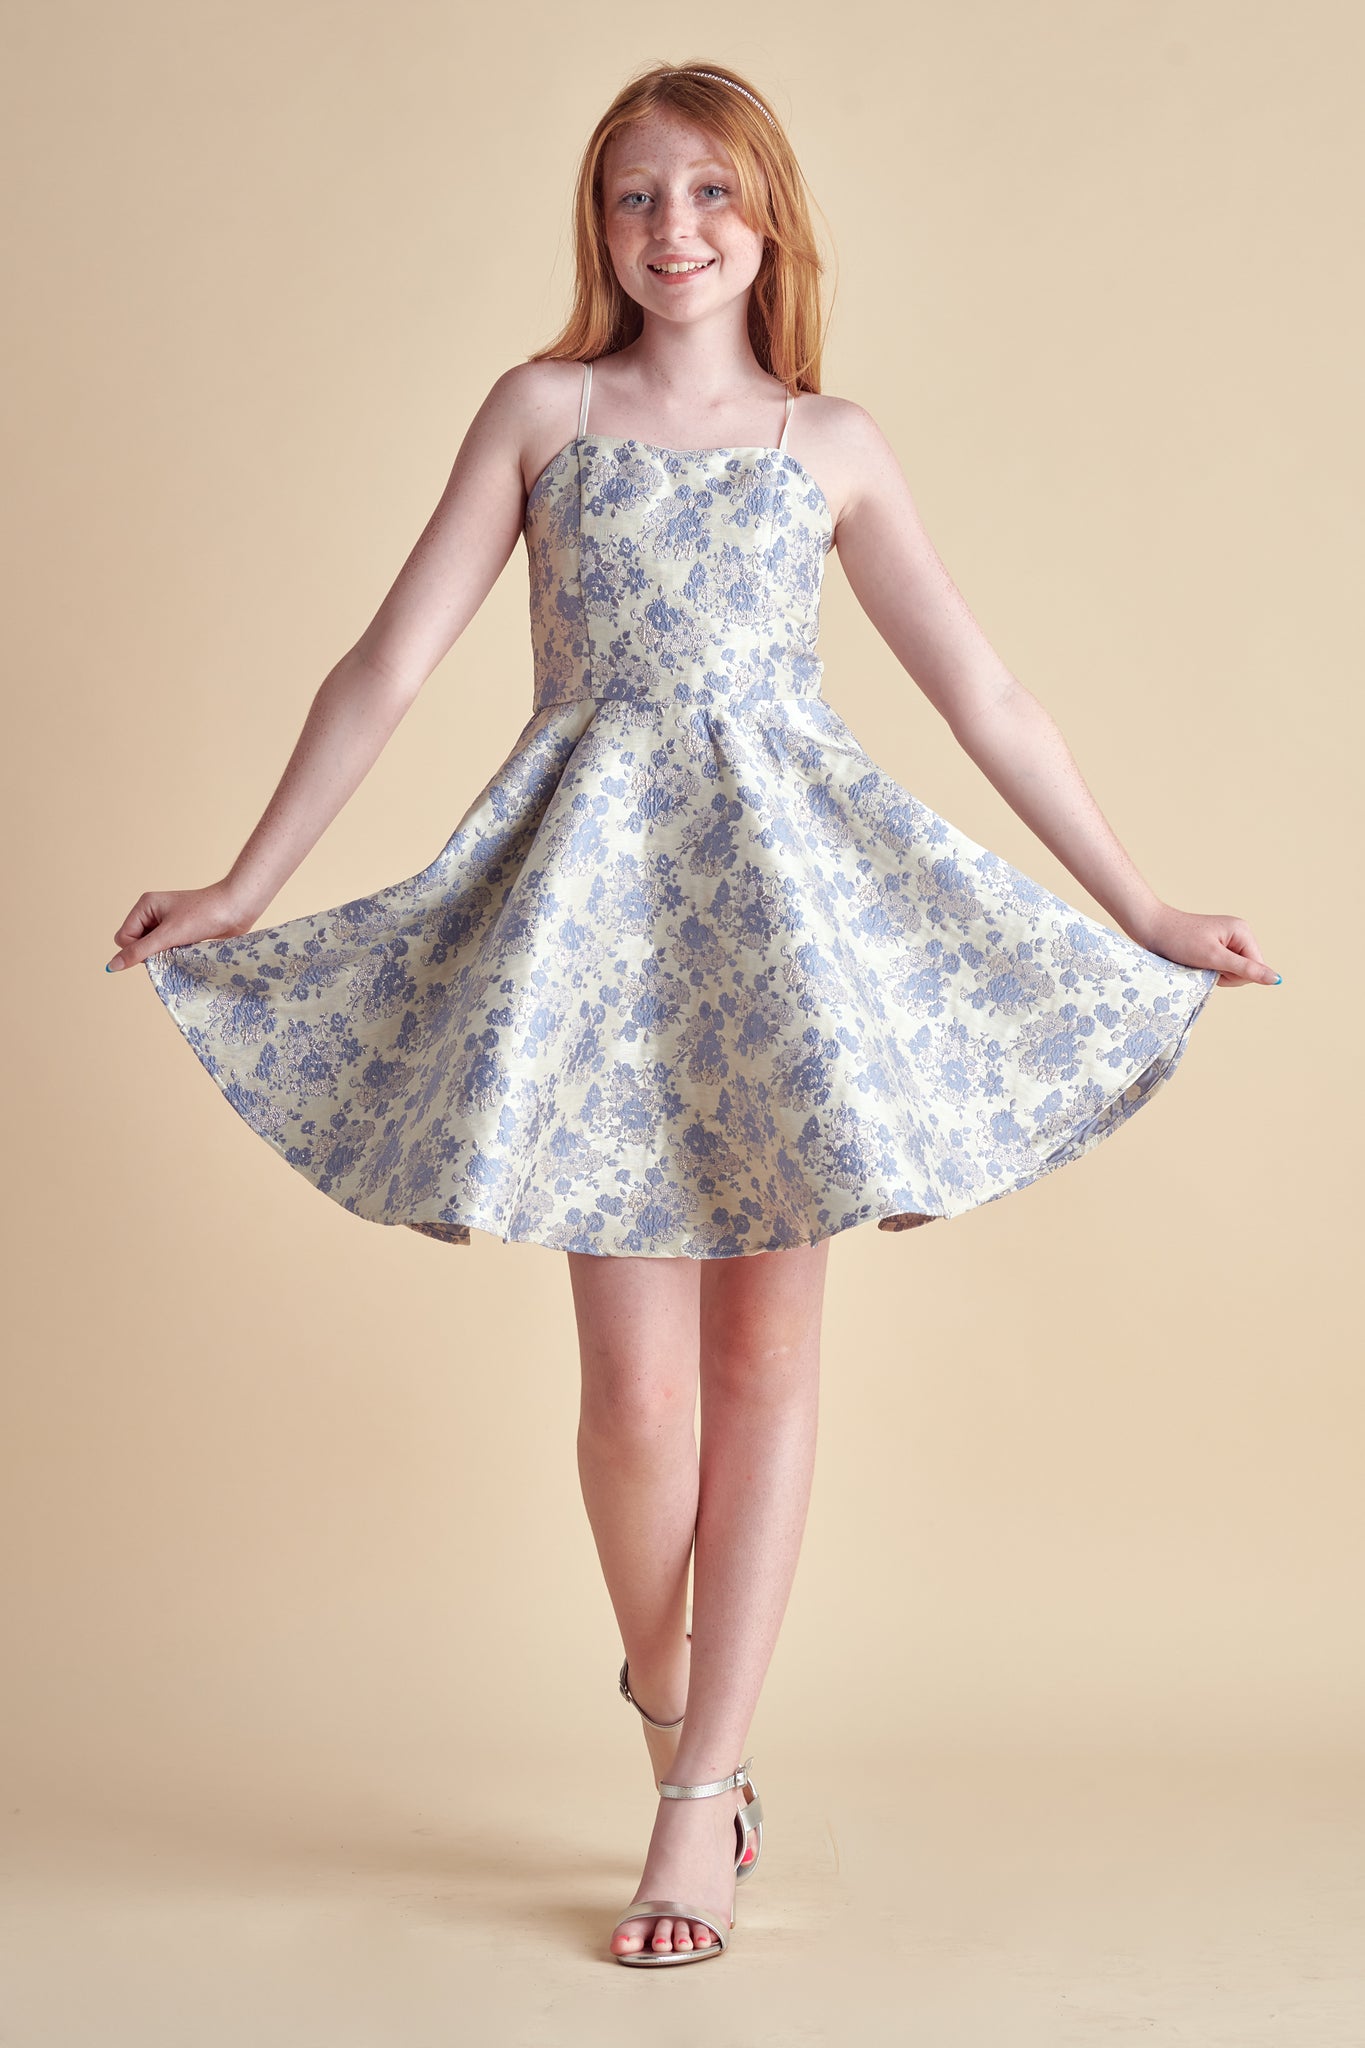 Red haired girl in a periwinkle floral fit and flare dress.